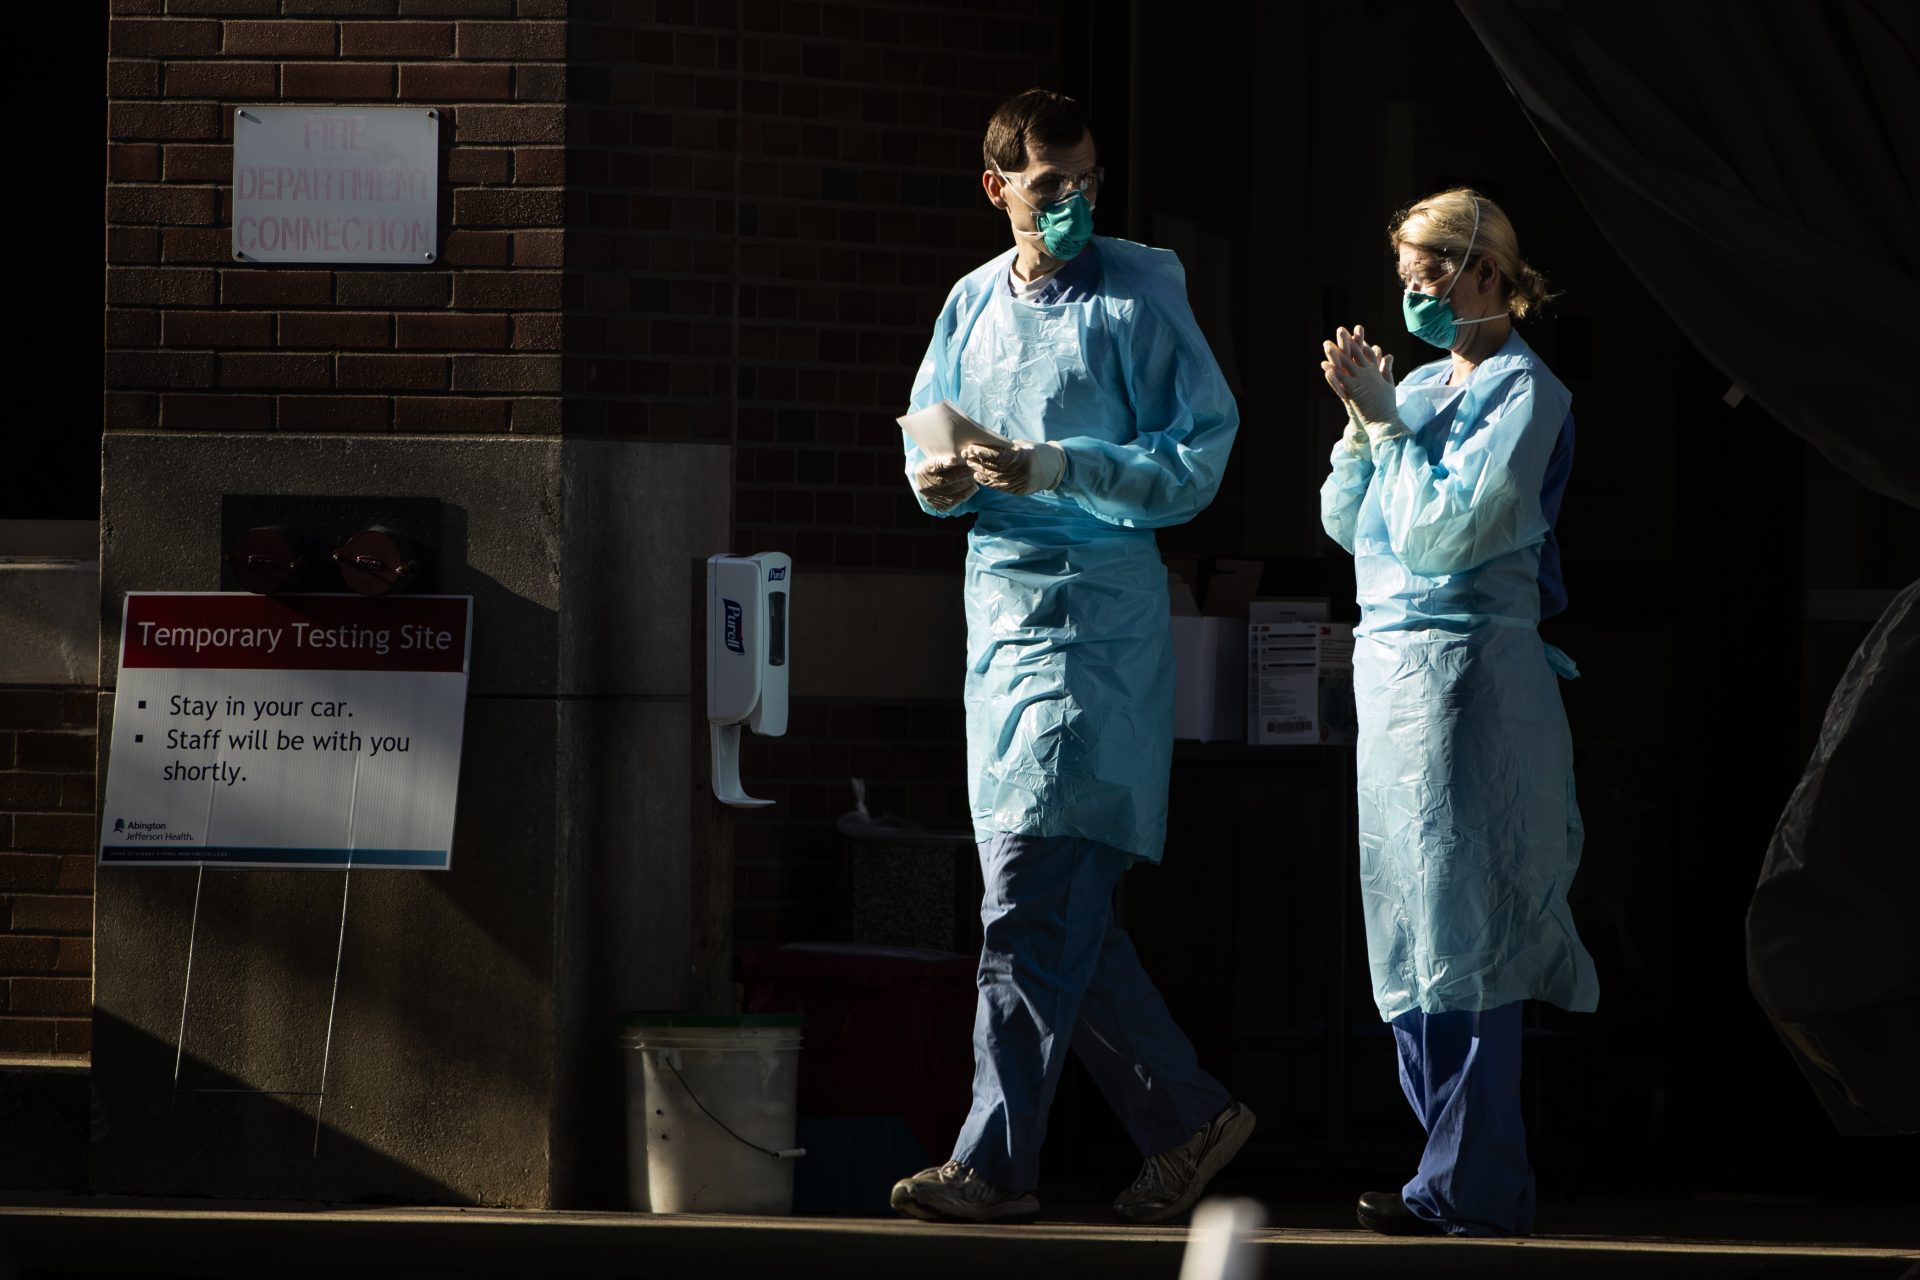 Healthcare workers stand by at a COVID-19 temporary testing site at Abington Hospital in Abington, Pa., Wednesday, March 18, 2020. For most people, the new coronavirus causes only mild or moderate symptoms. For some it can cause more severe illness.